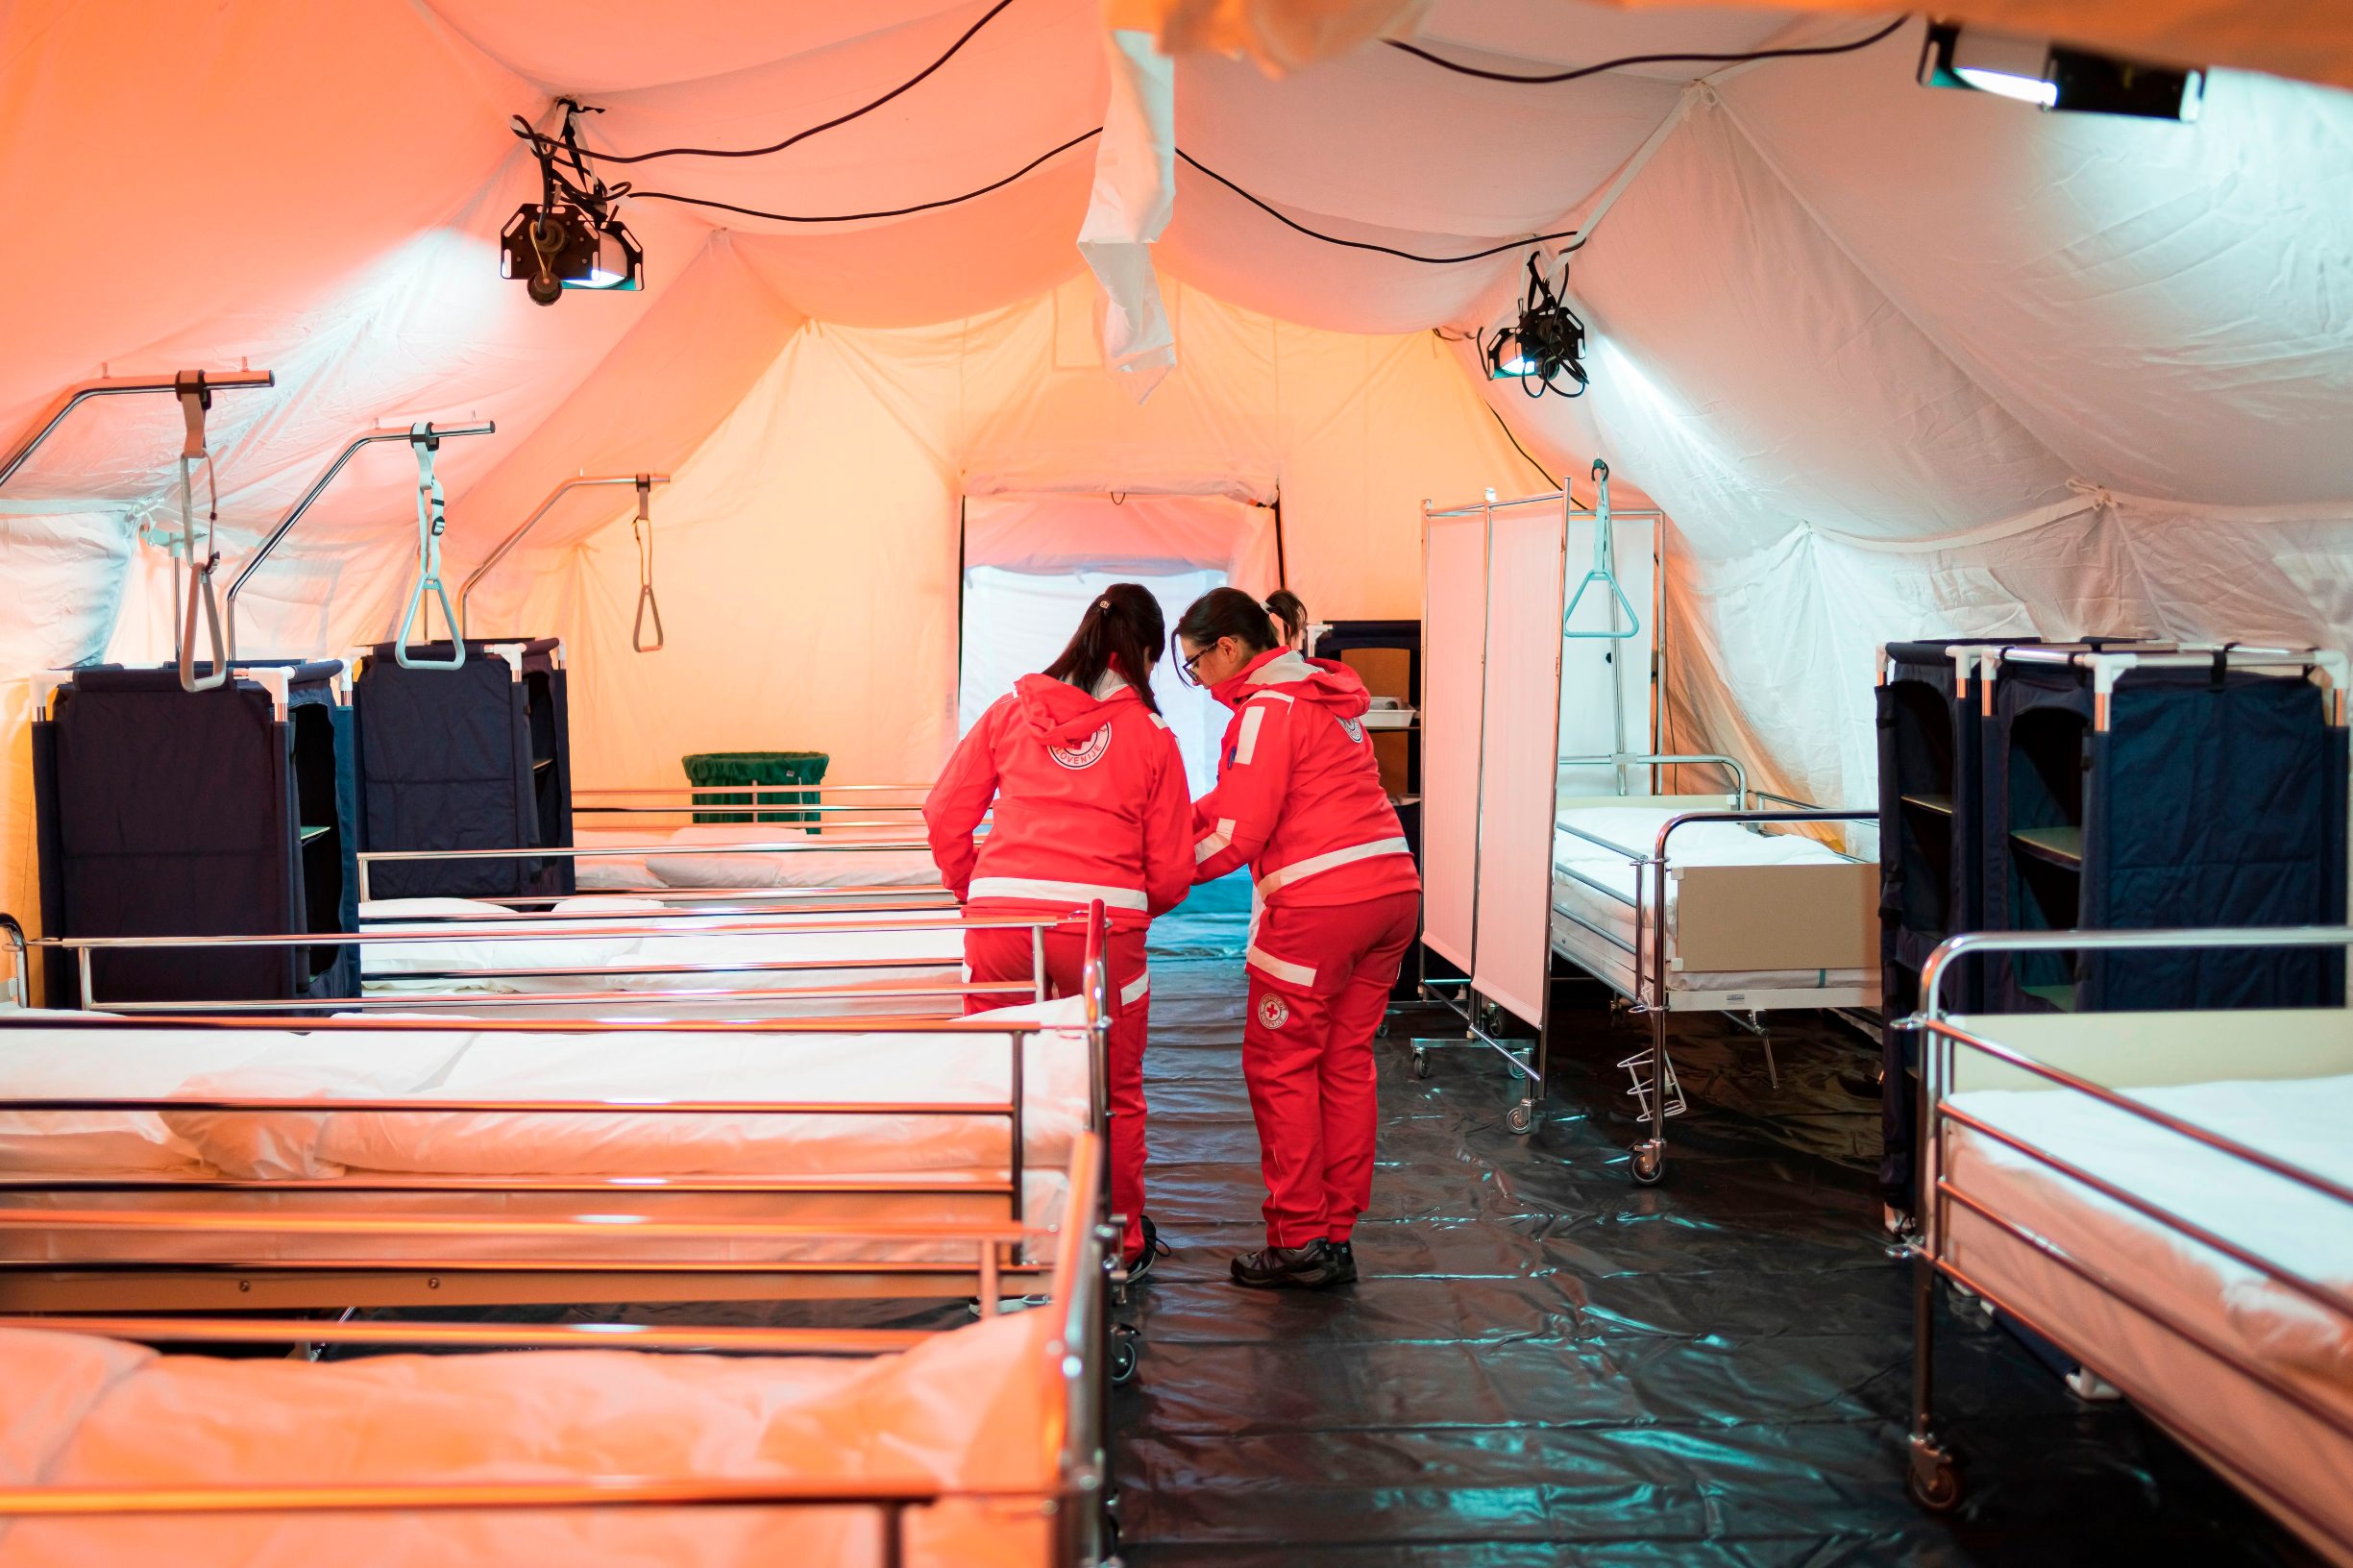 Members of Red Cross prepare beds at facilities for the treatment of coronavirus patients set at the Edvard Peperko Army Barracks in Ljubljana on March 17, 2020. (Photo by Jure Makovec / AFP)